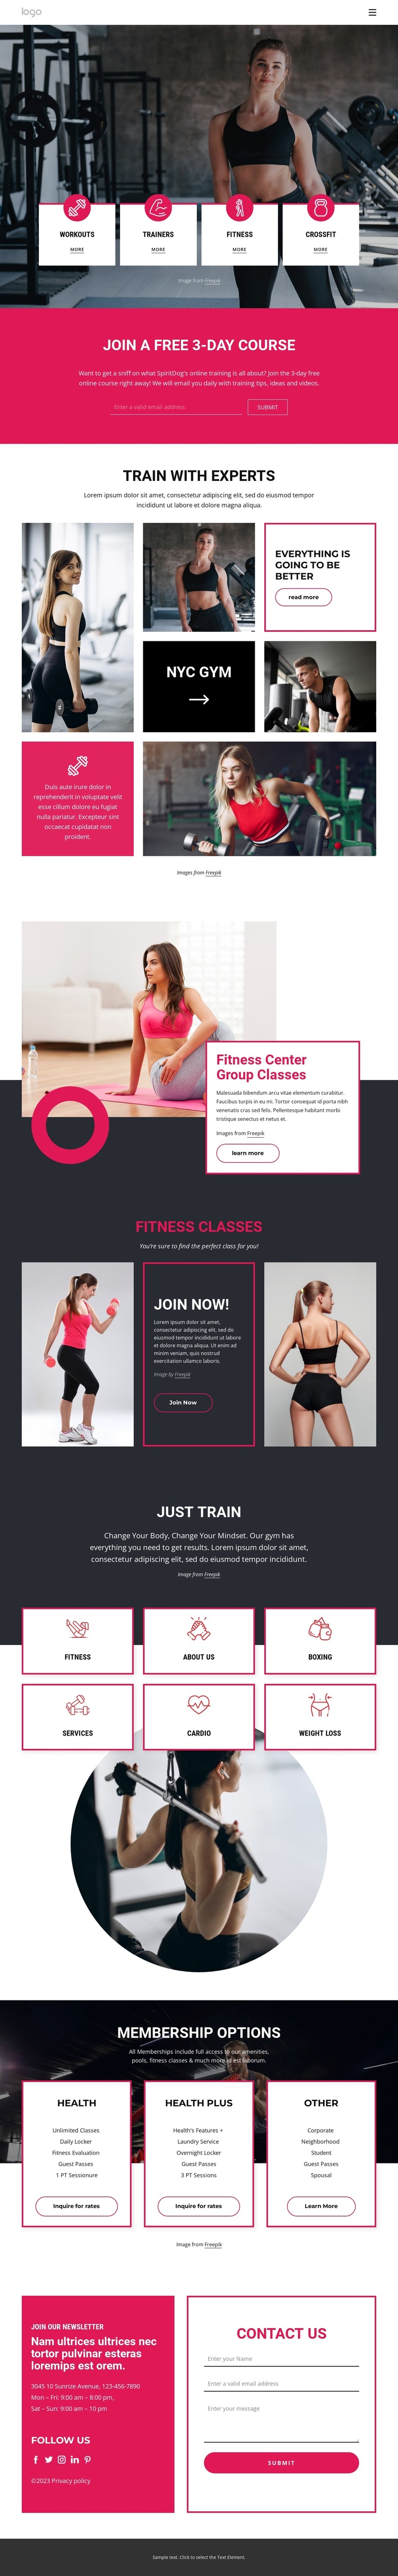 Join a Crossfit gym Joomla Page Builder